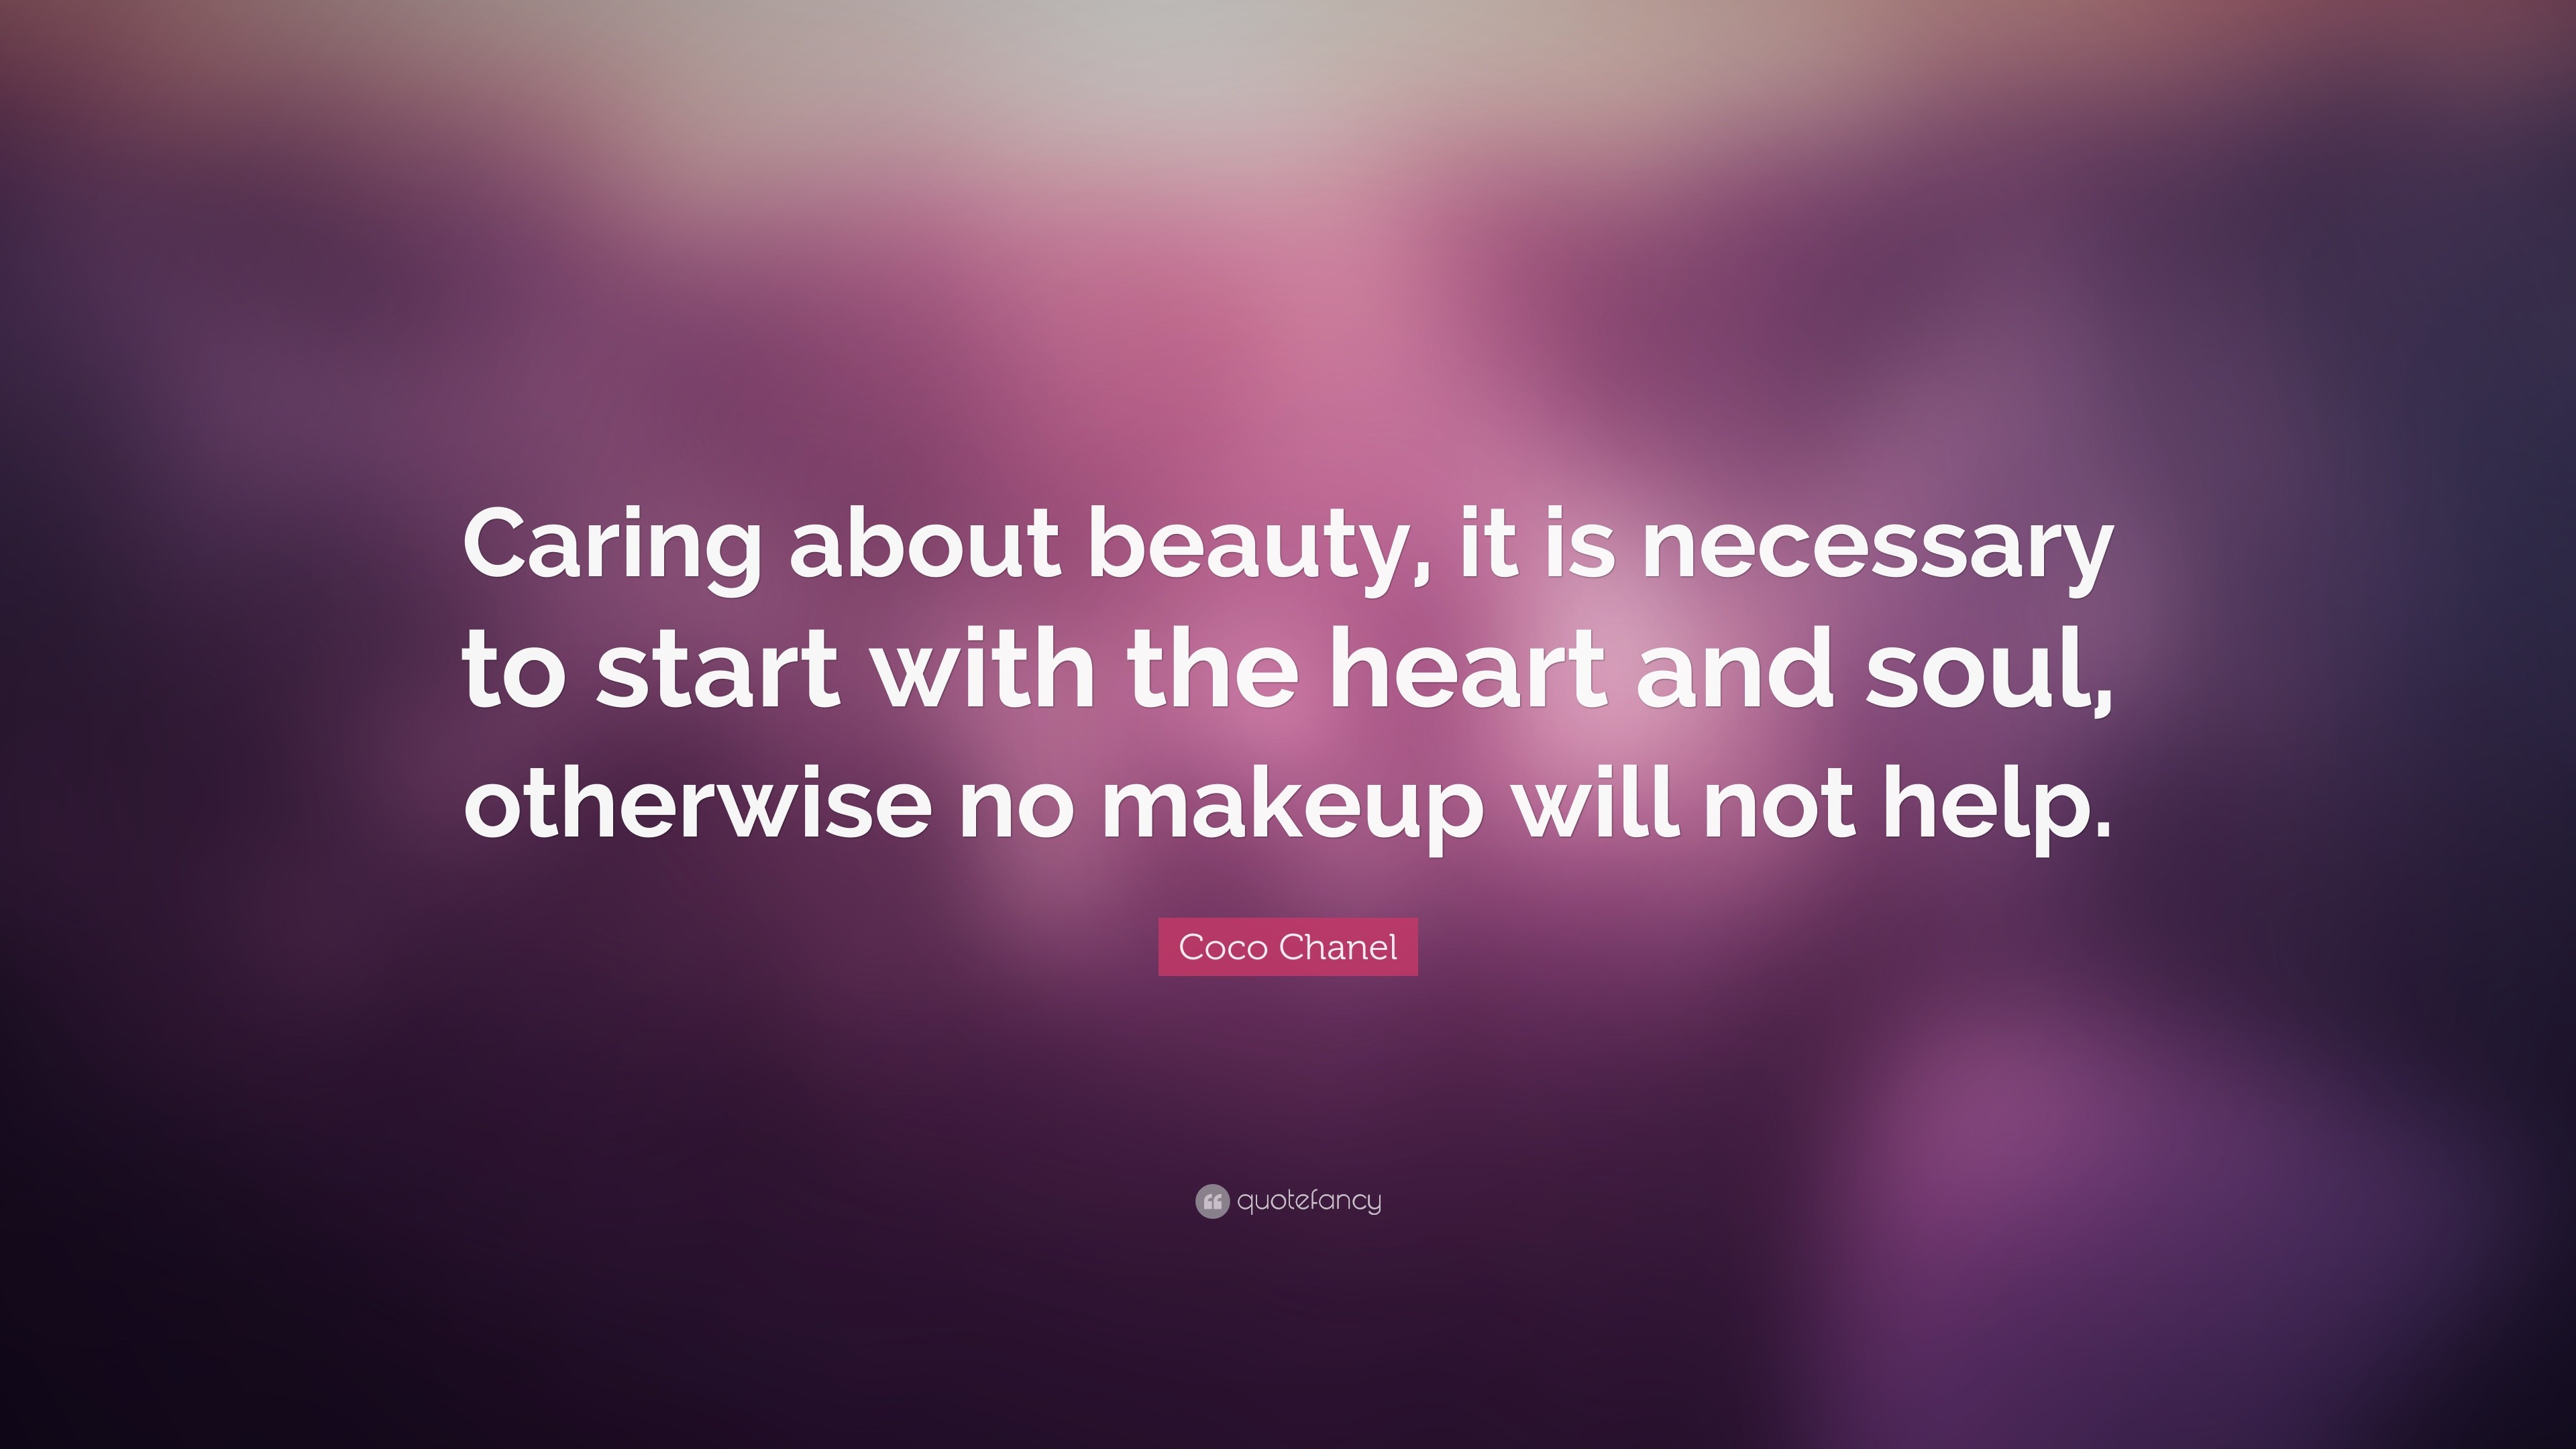 Coco Chanel Quote: “Caring about beauty, it is necessary to start with the